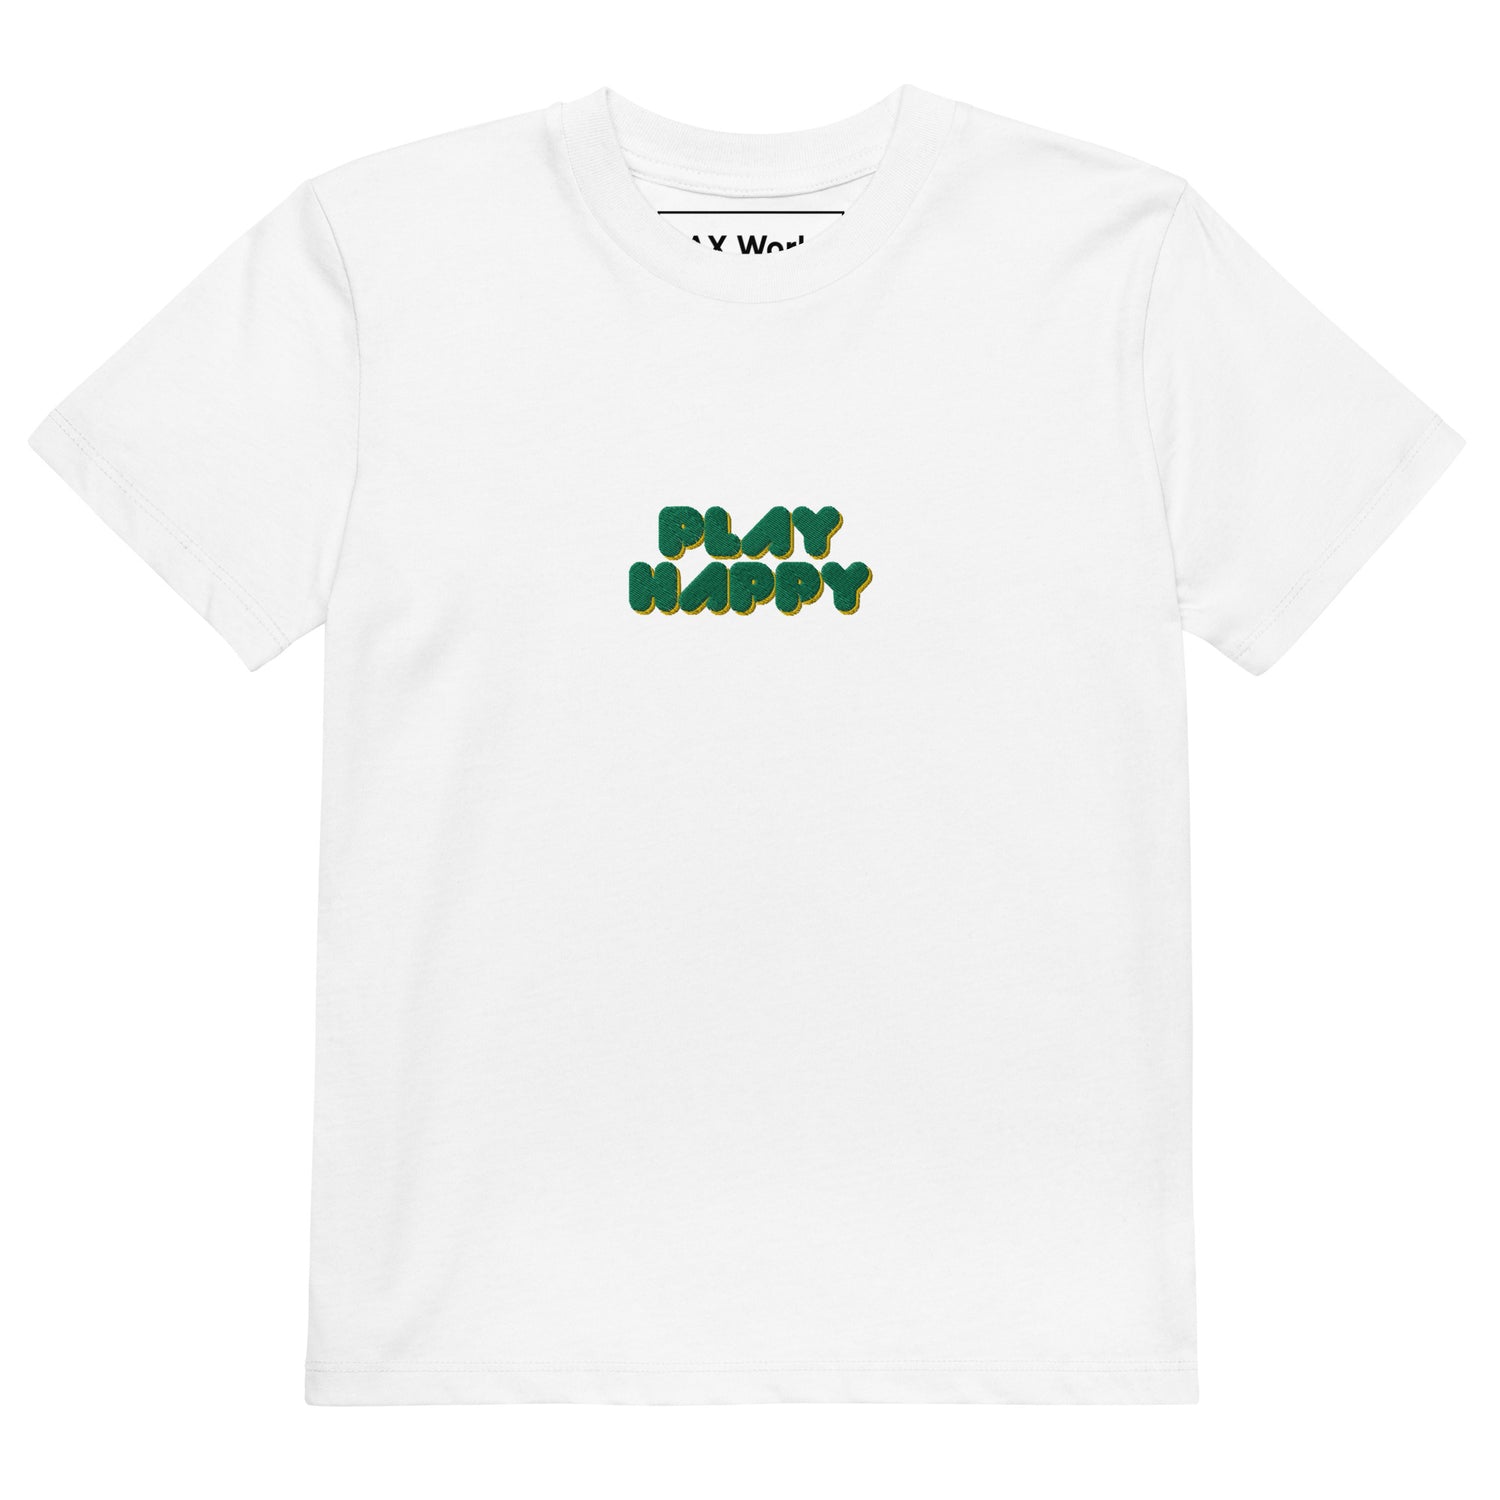 White 'Play Happy' Lacrosse Embroidered Kids Lacrosse Shirt  Front